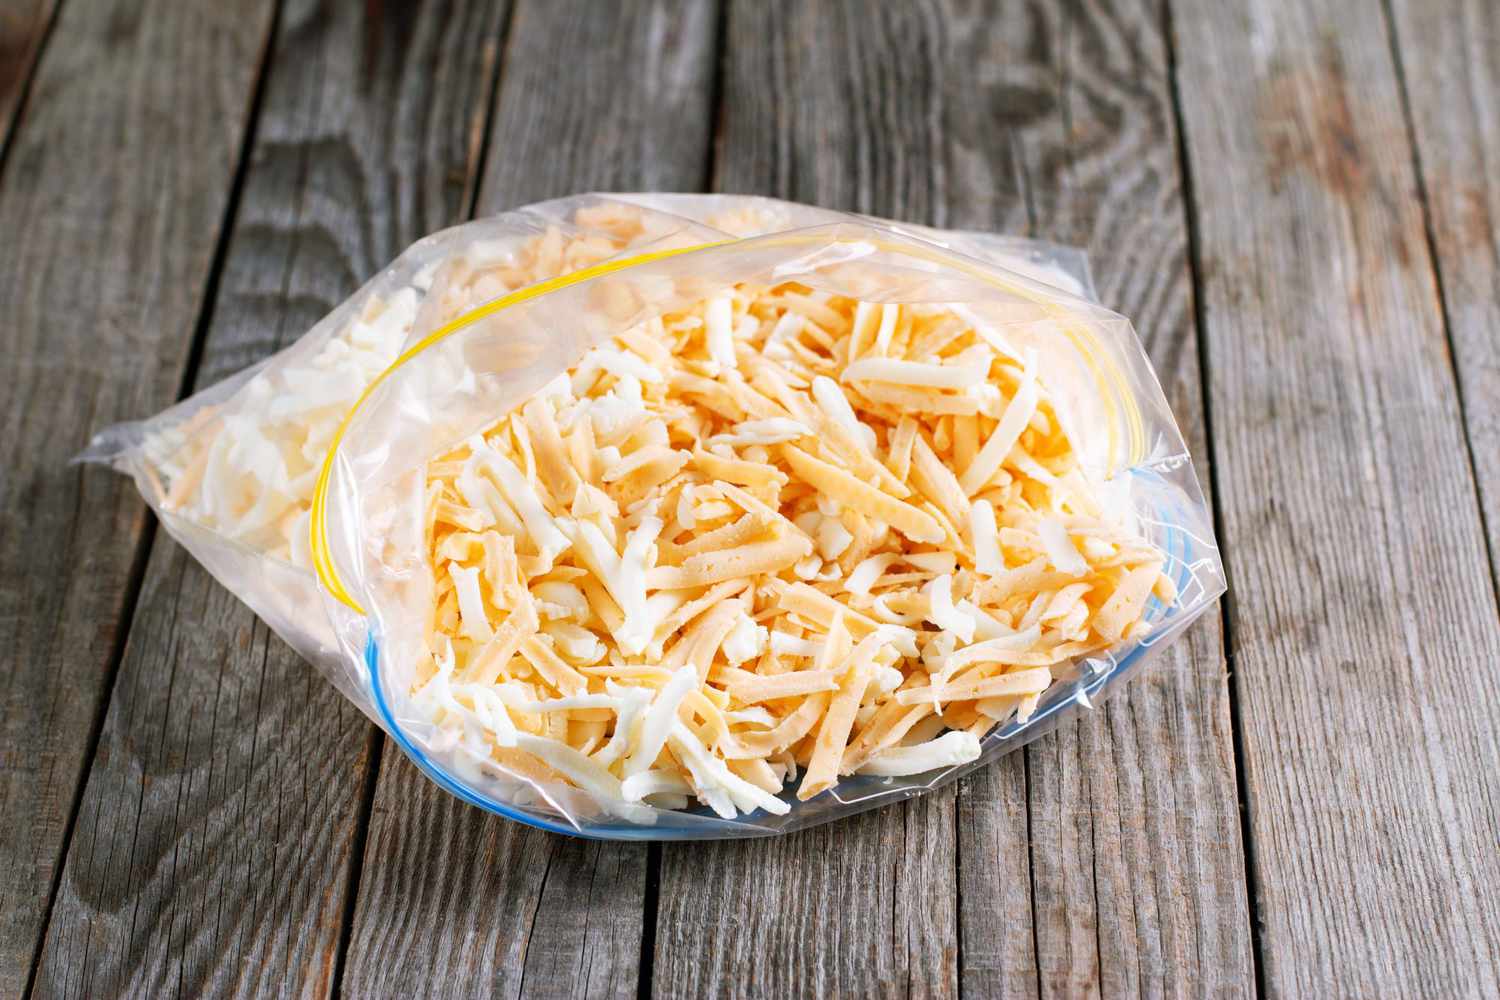 How To Store Freshly Shredded Cheese